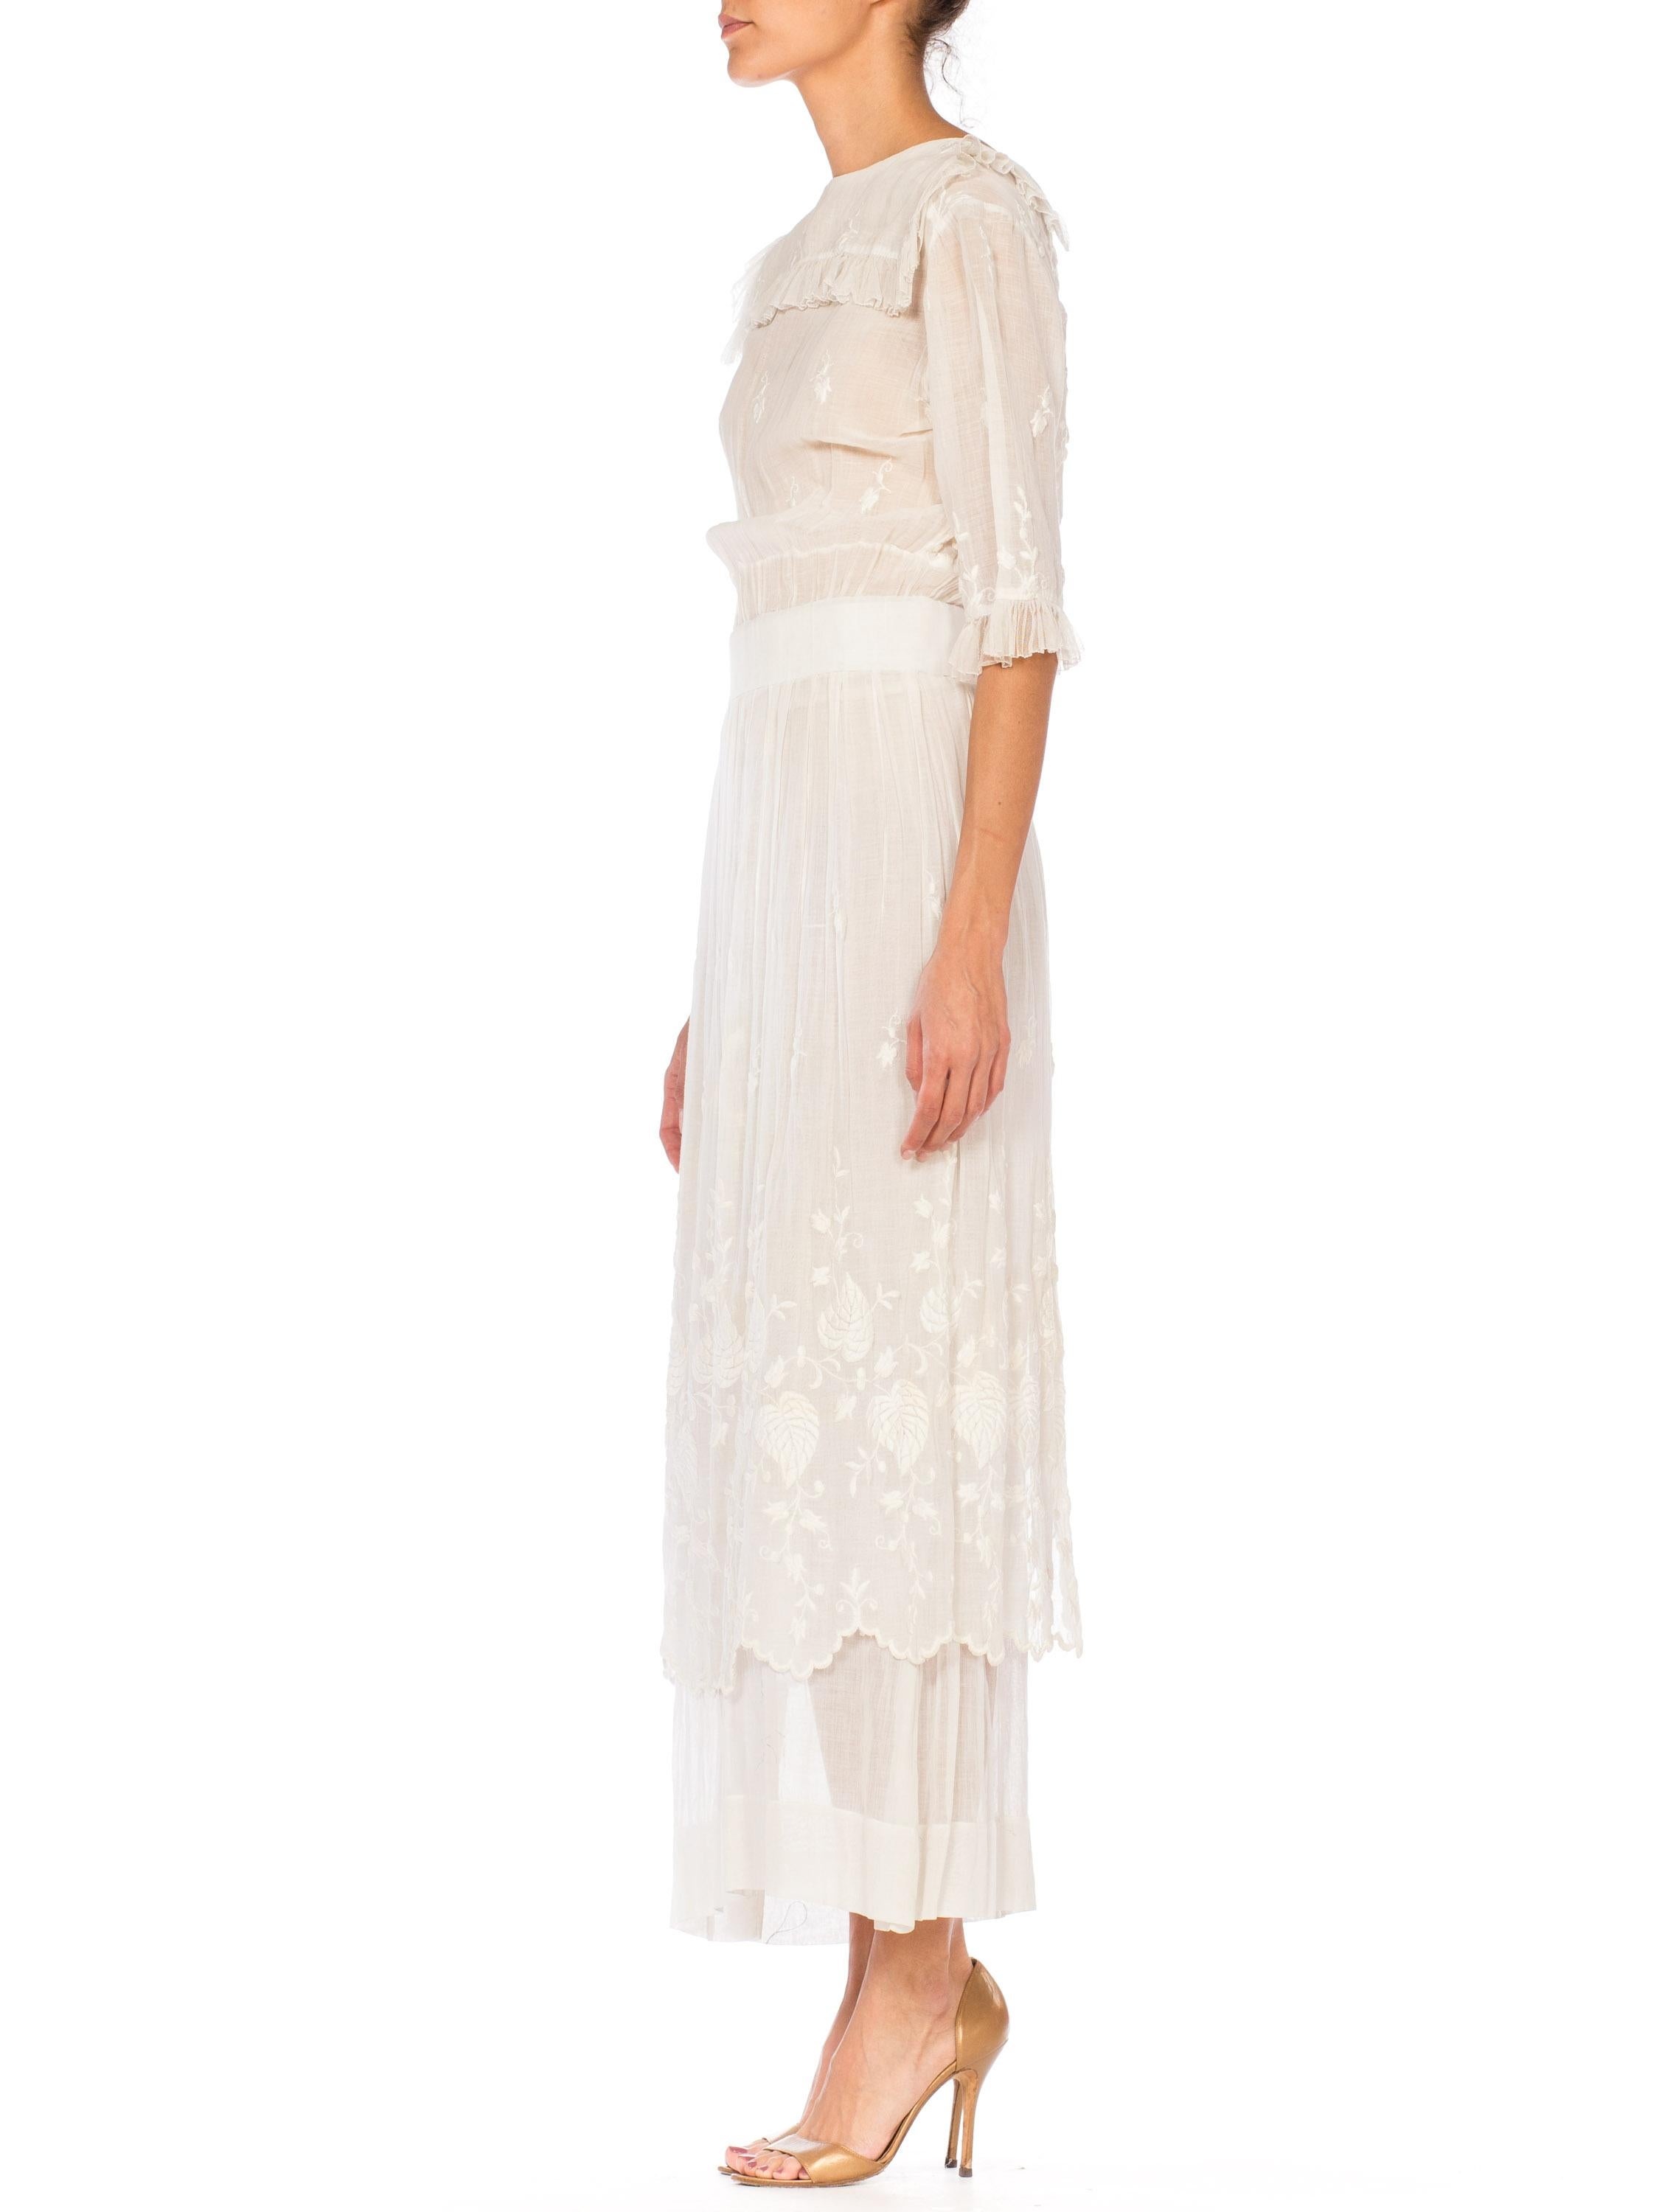 1910S White Embroidered Cotton Voile Edwardian Tea Dress With Sleeves In Excellent Condition For Sale In New York, NY